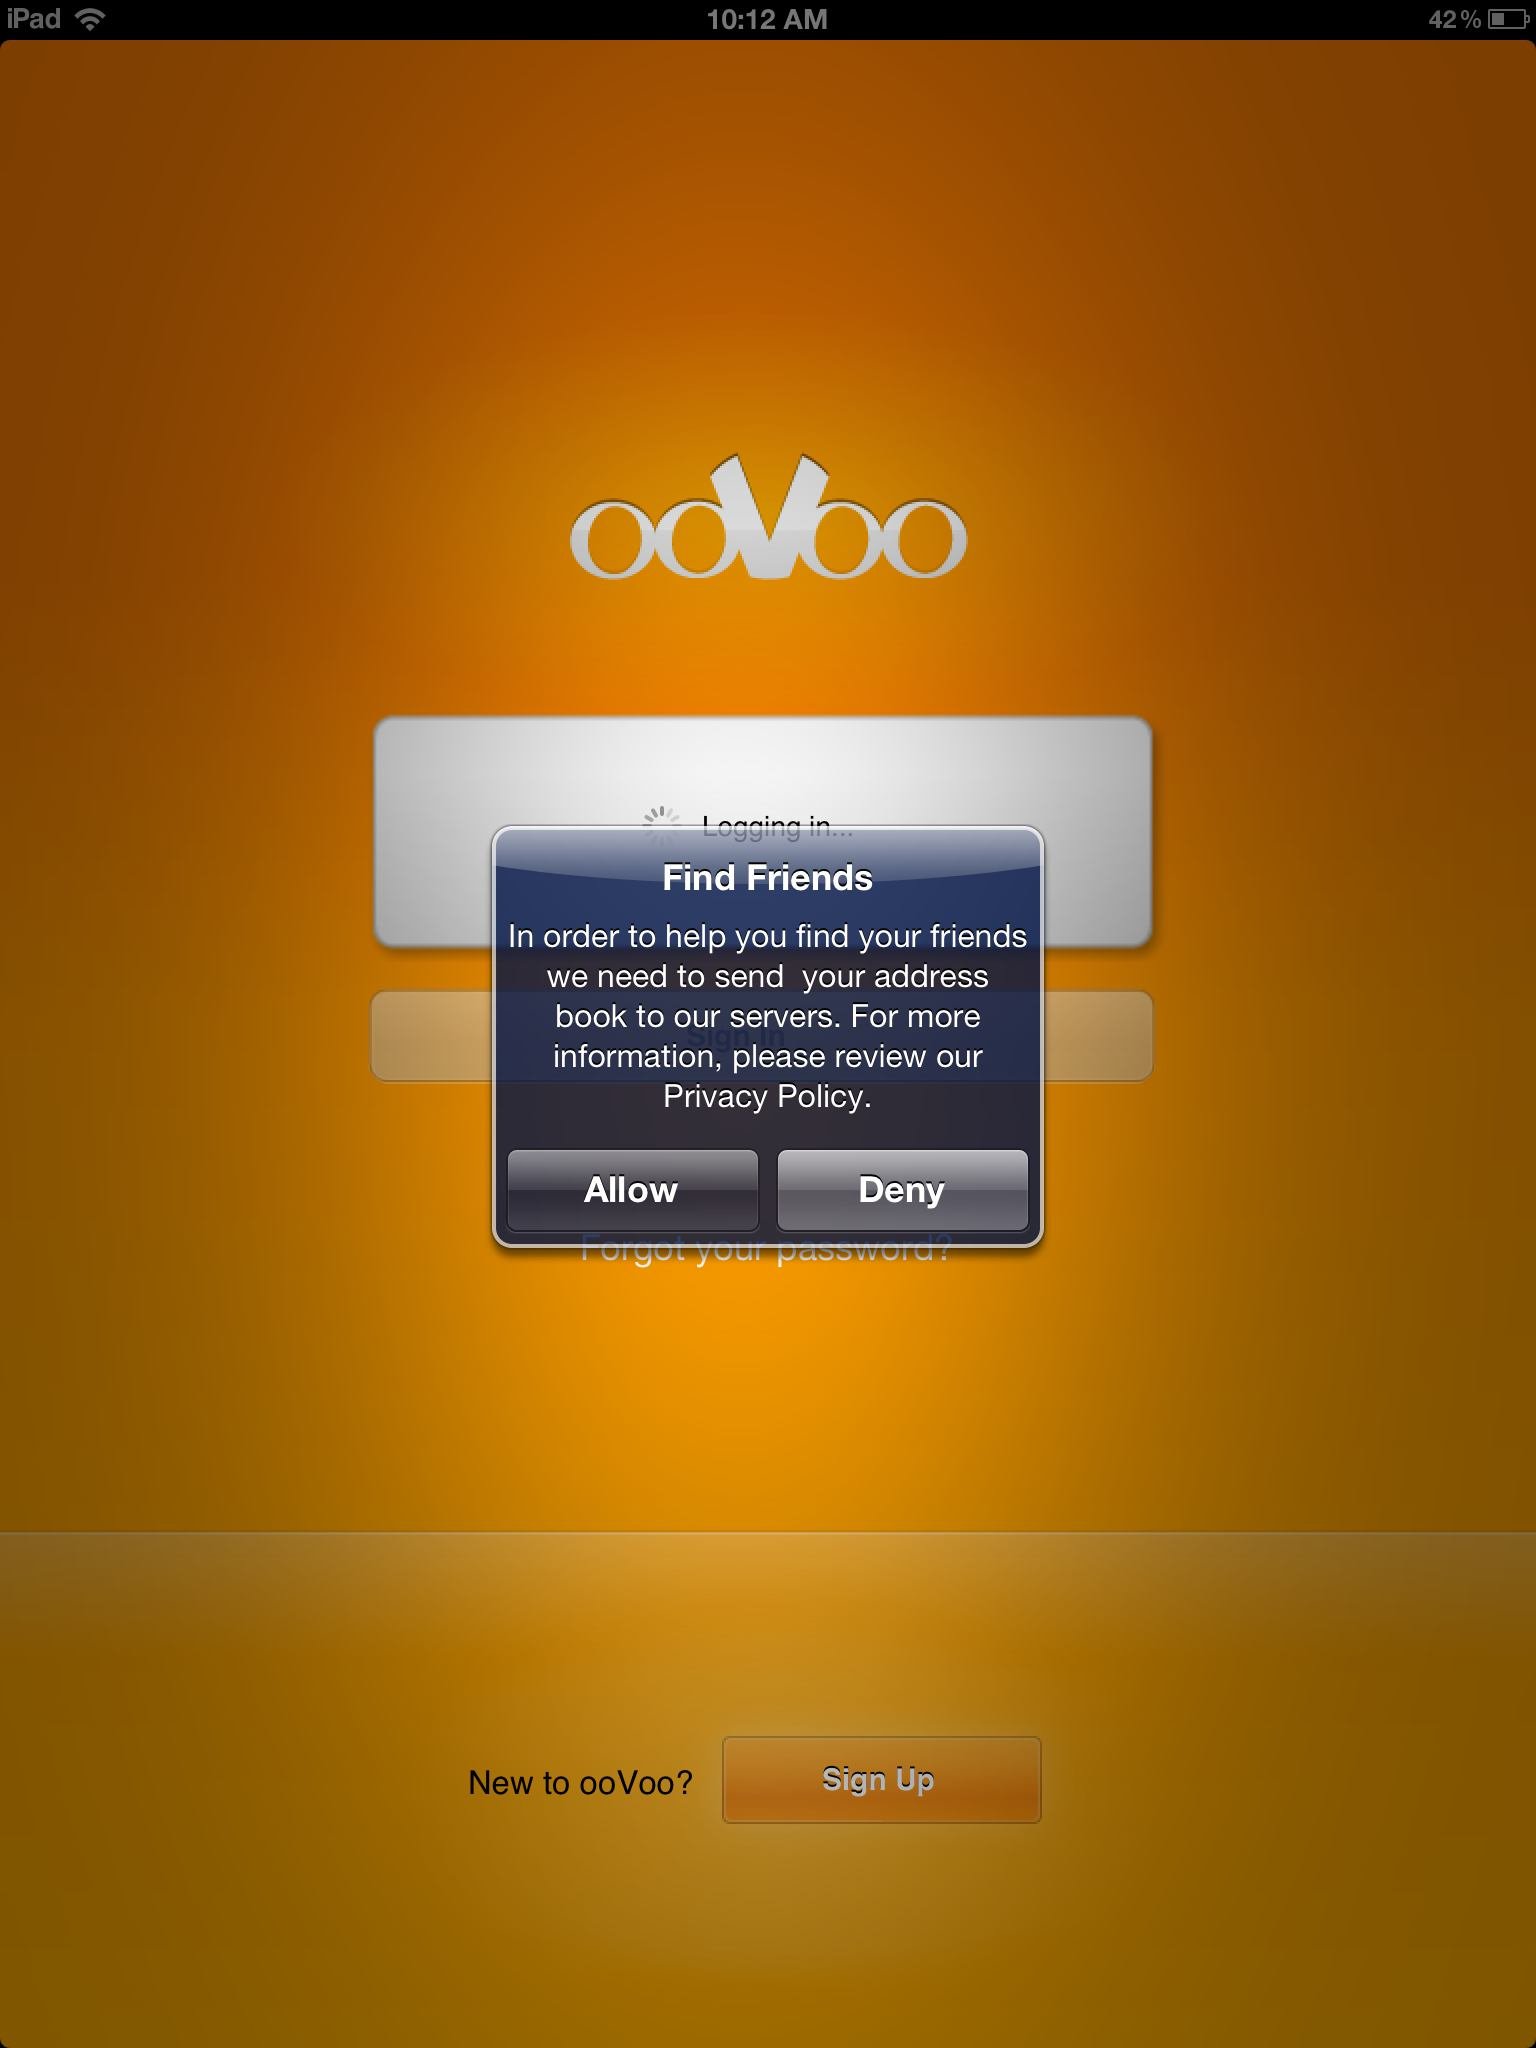 How can you sign up for an Oovoo account?